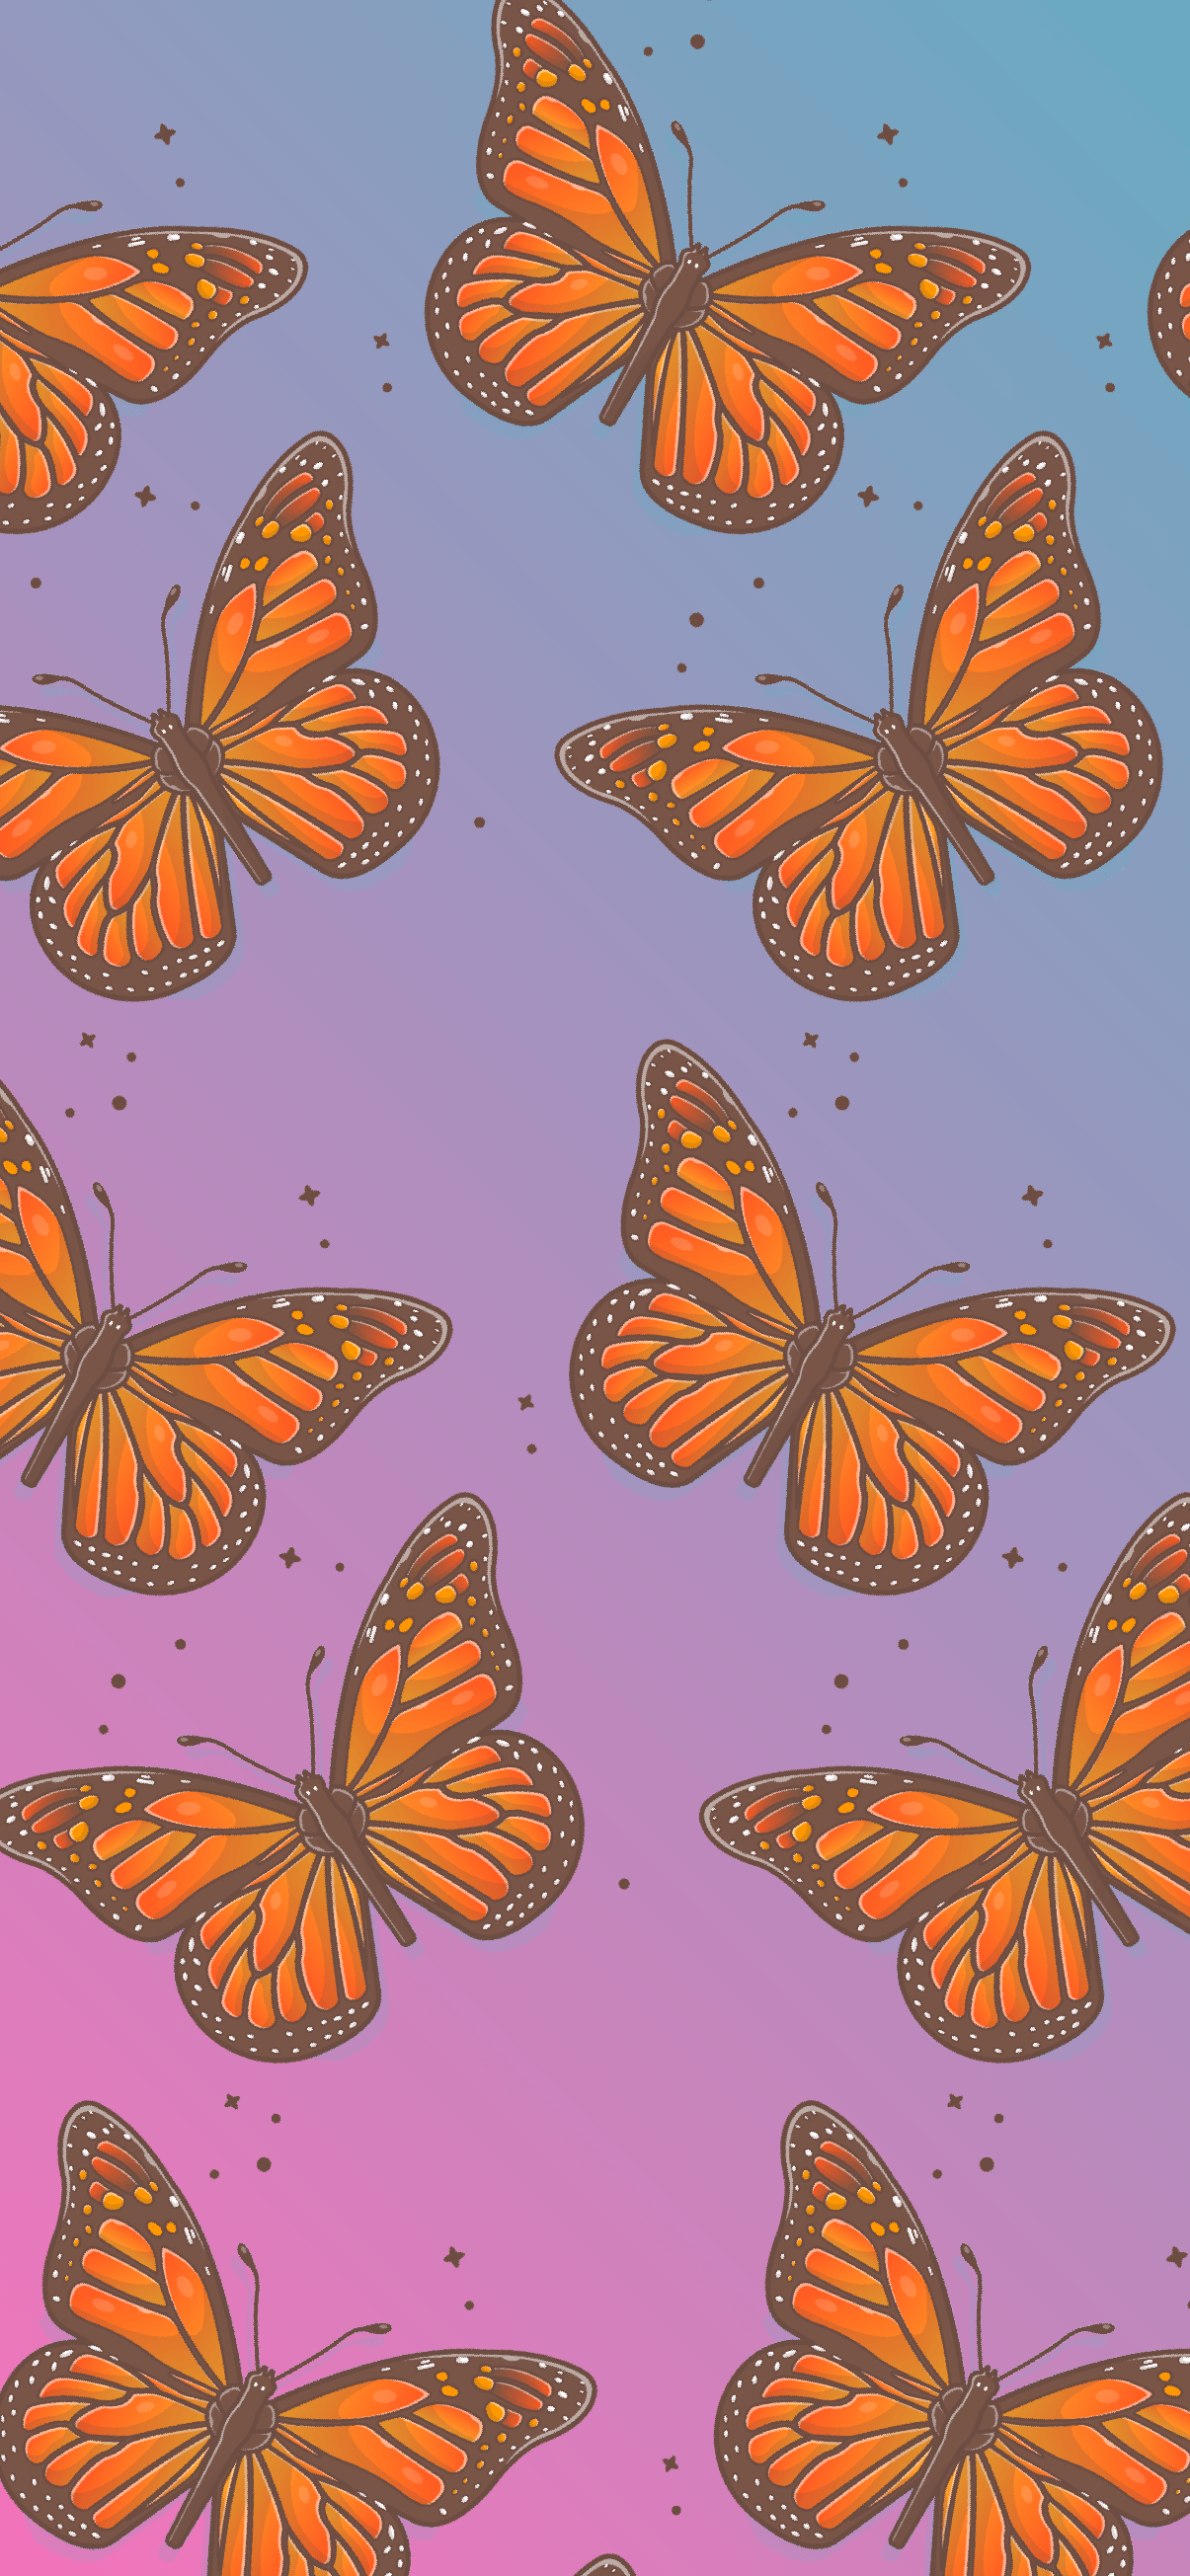 Aesthetic butterfly wallpaper for phone background. - Butterfly, pattern